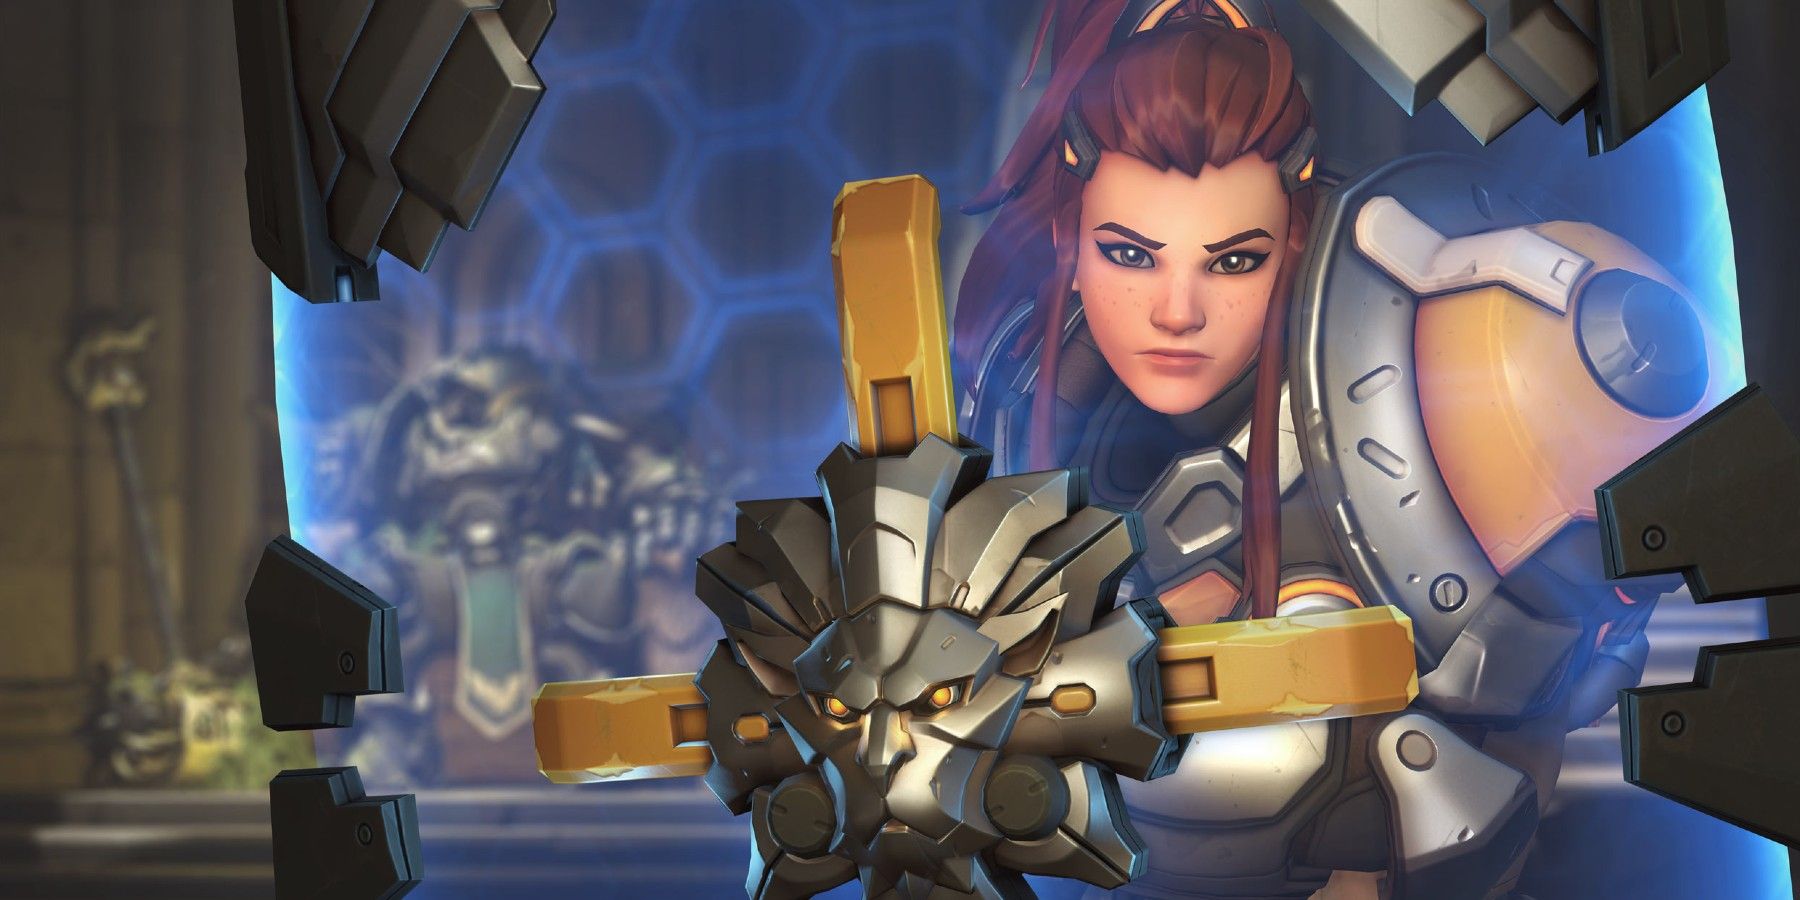 Overwatch Fan Creates Incredible Pink Brigitte Skin Concept for Breast Cancer Awareness